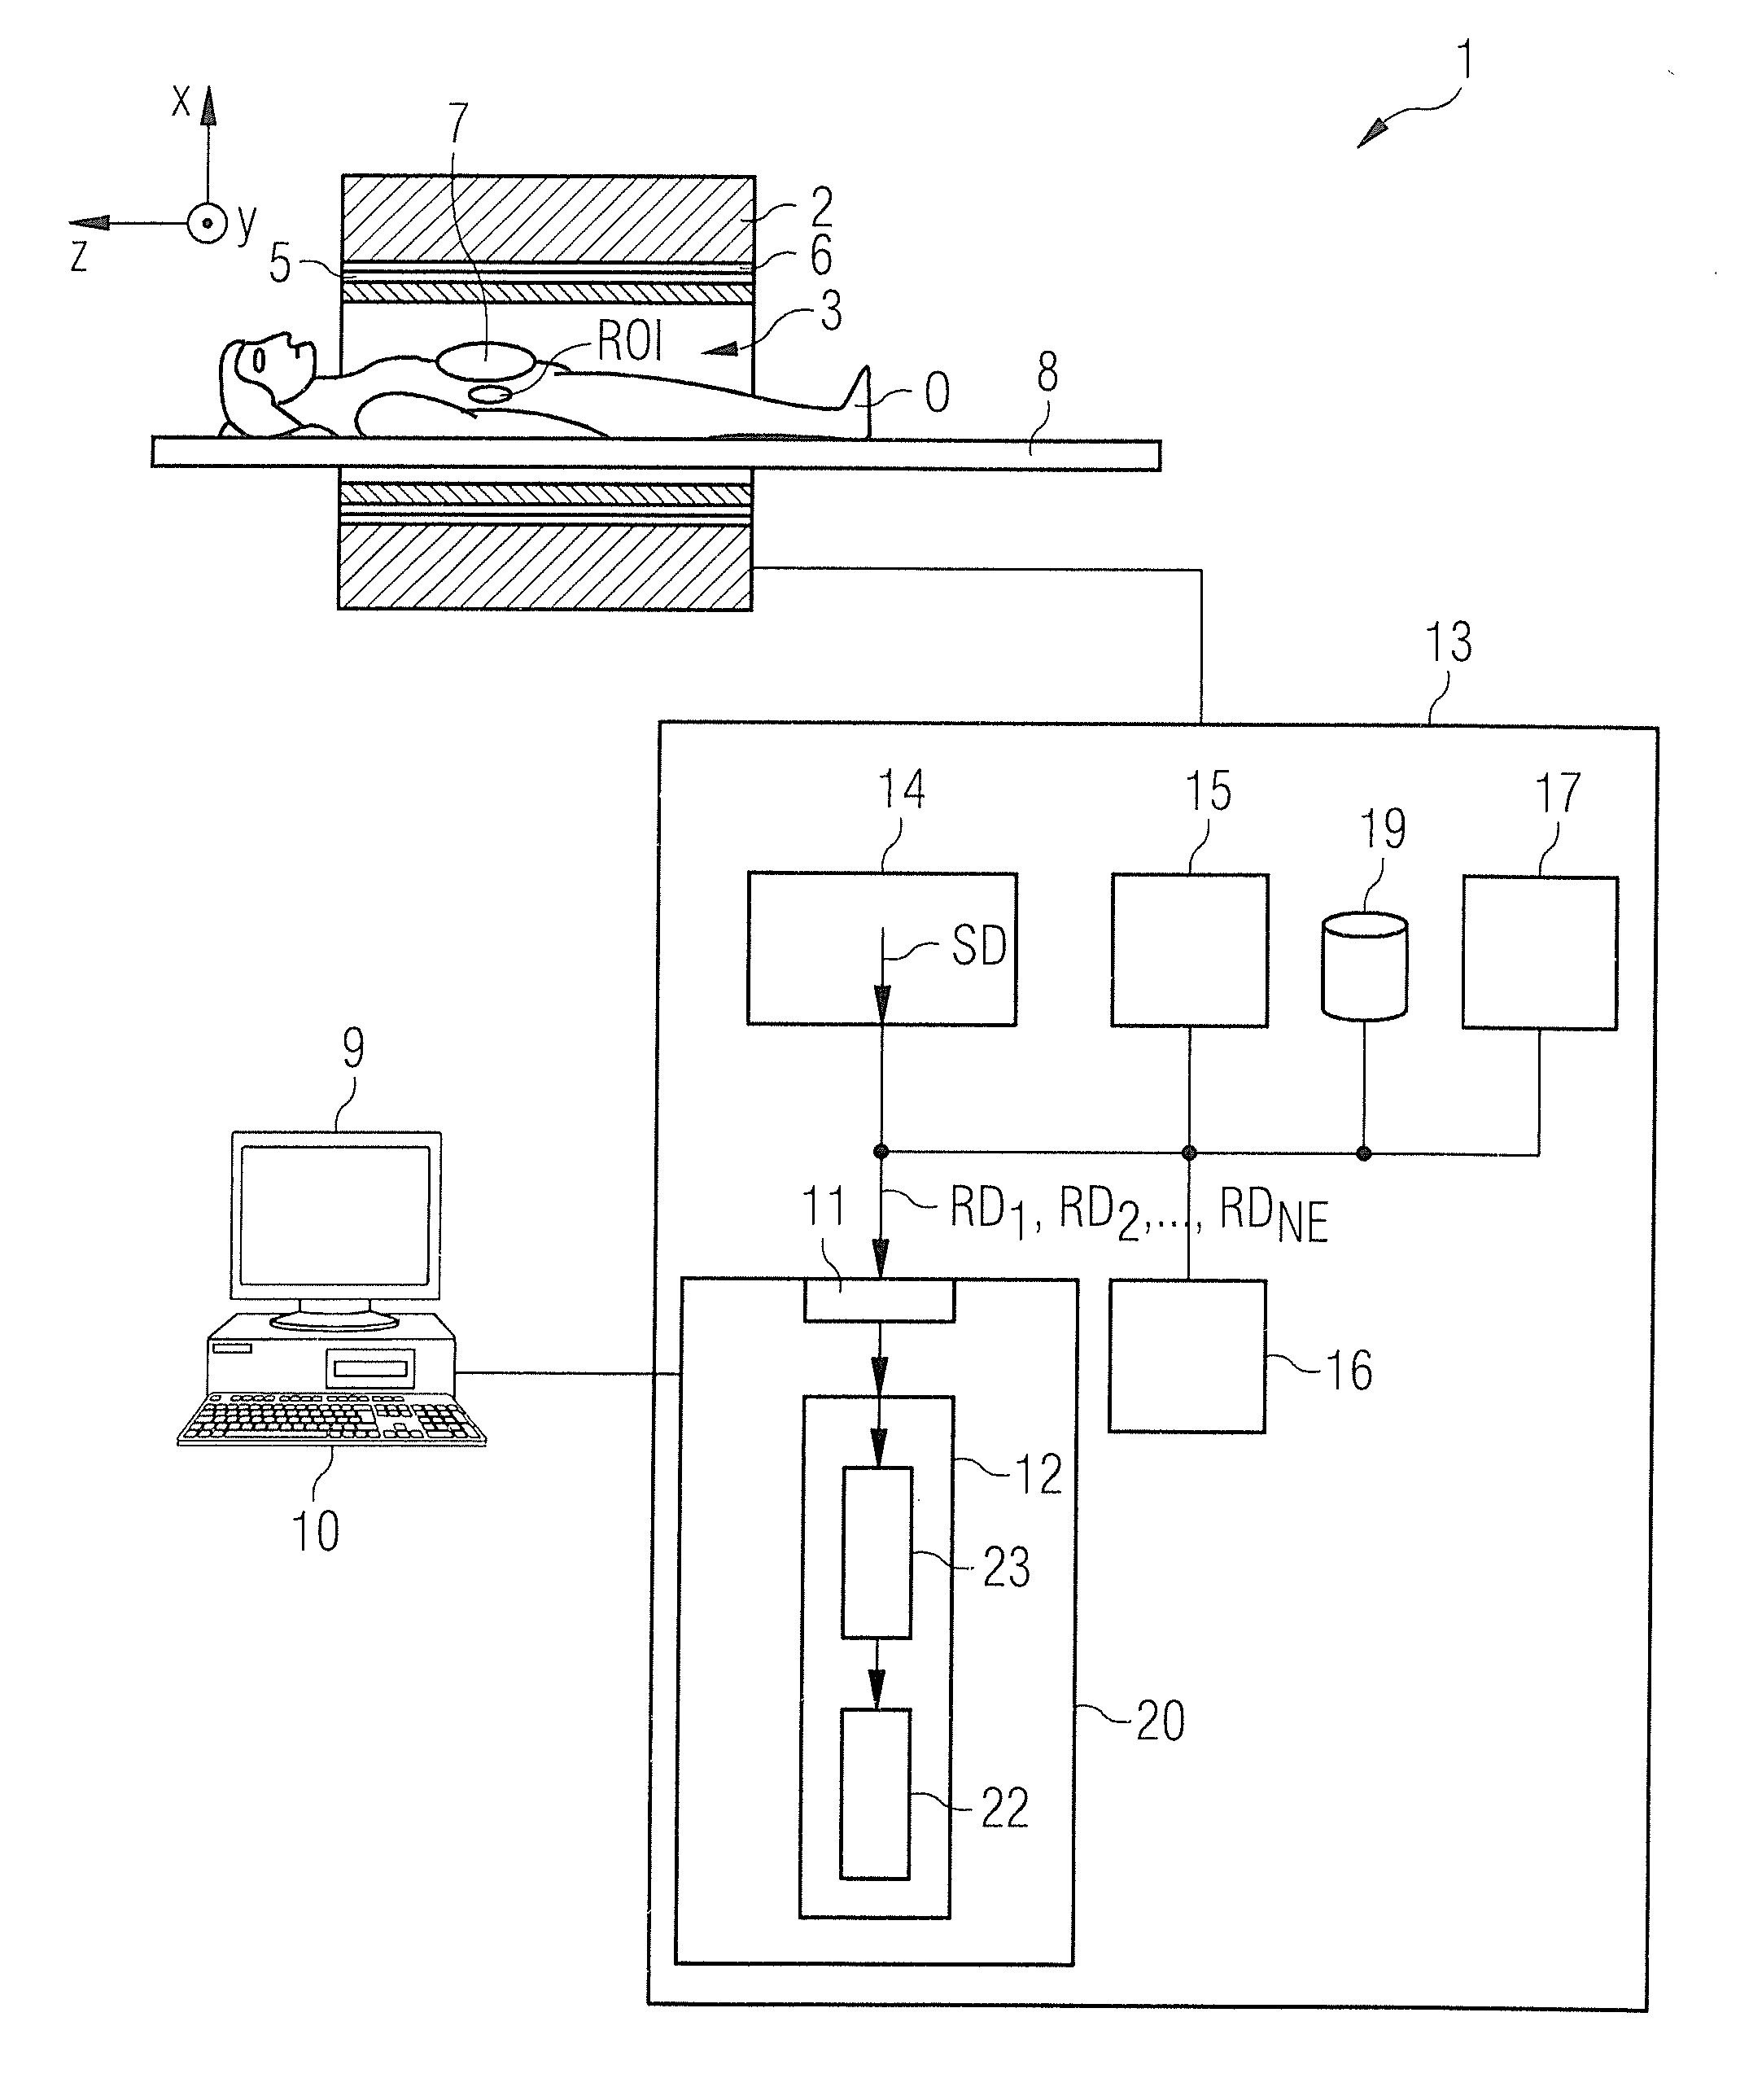 Method and apparatus for reconstruction of magnetic resonance image data for multiple chemical substances in multi-echo imaging